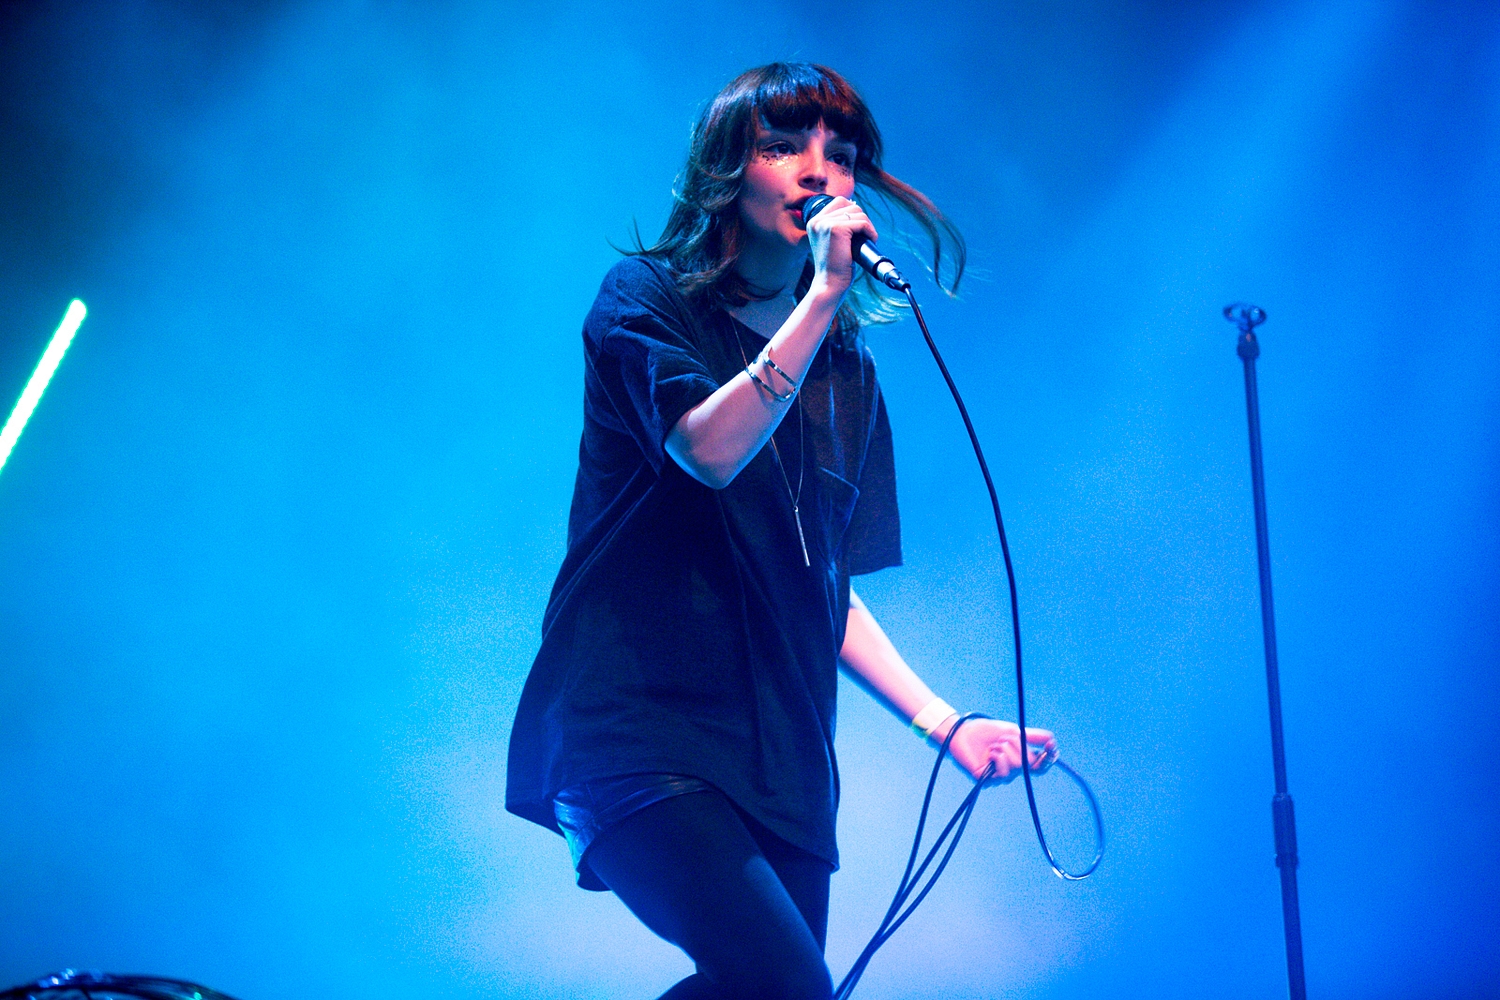 CHVRCHES announce intimate London gig details